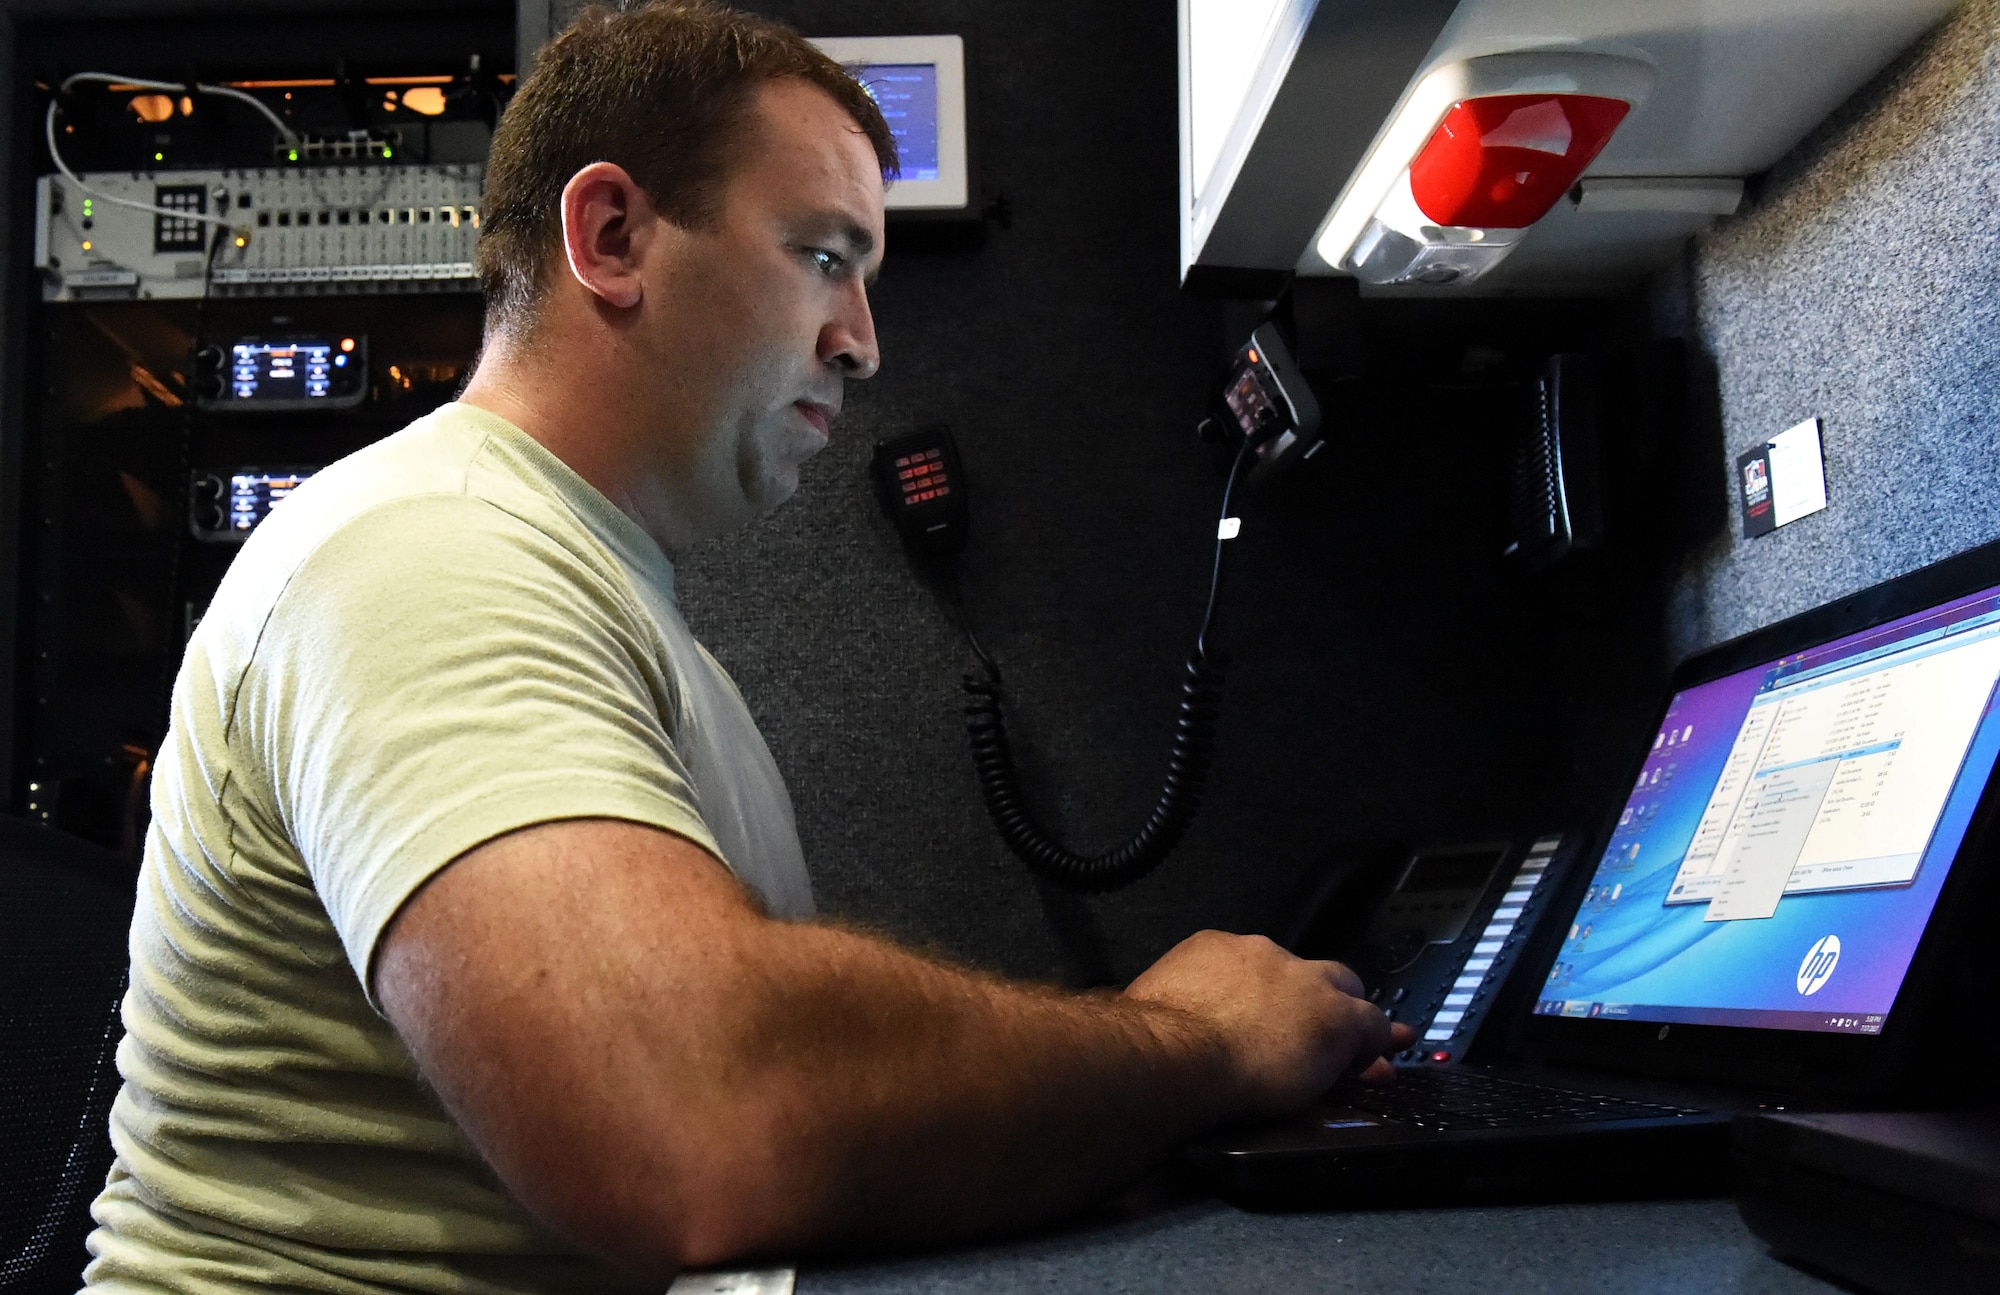 Master Sgt. Brad Kuennen, a Radio Frequency Transmissions Systems Technician, starts up the laptop at his station in the 132d Wing's Mobile Emergency Operations Center (MEOC) on July 17, 2017 at Fort McCoy, Wis. Kuennen can set up radio frequencies from this laptop and controls all radio patches from the MEOC in support of PATRIOT North 2017. (U.S. Air National Guard photo by A1C Katelyn Sprott)